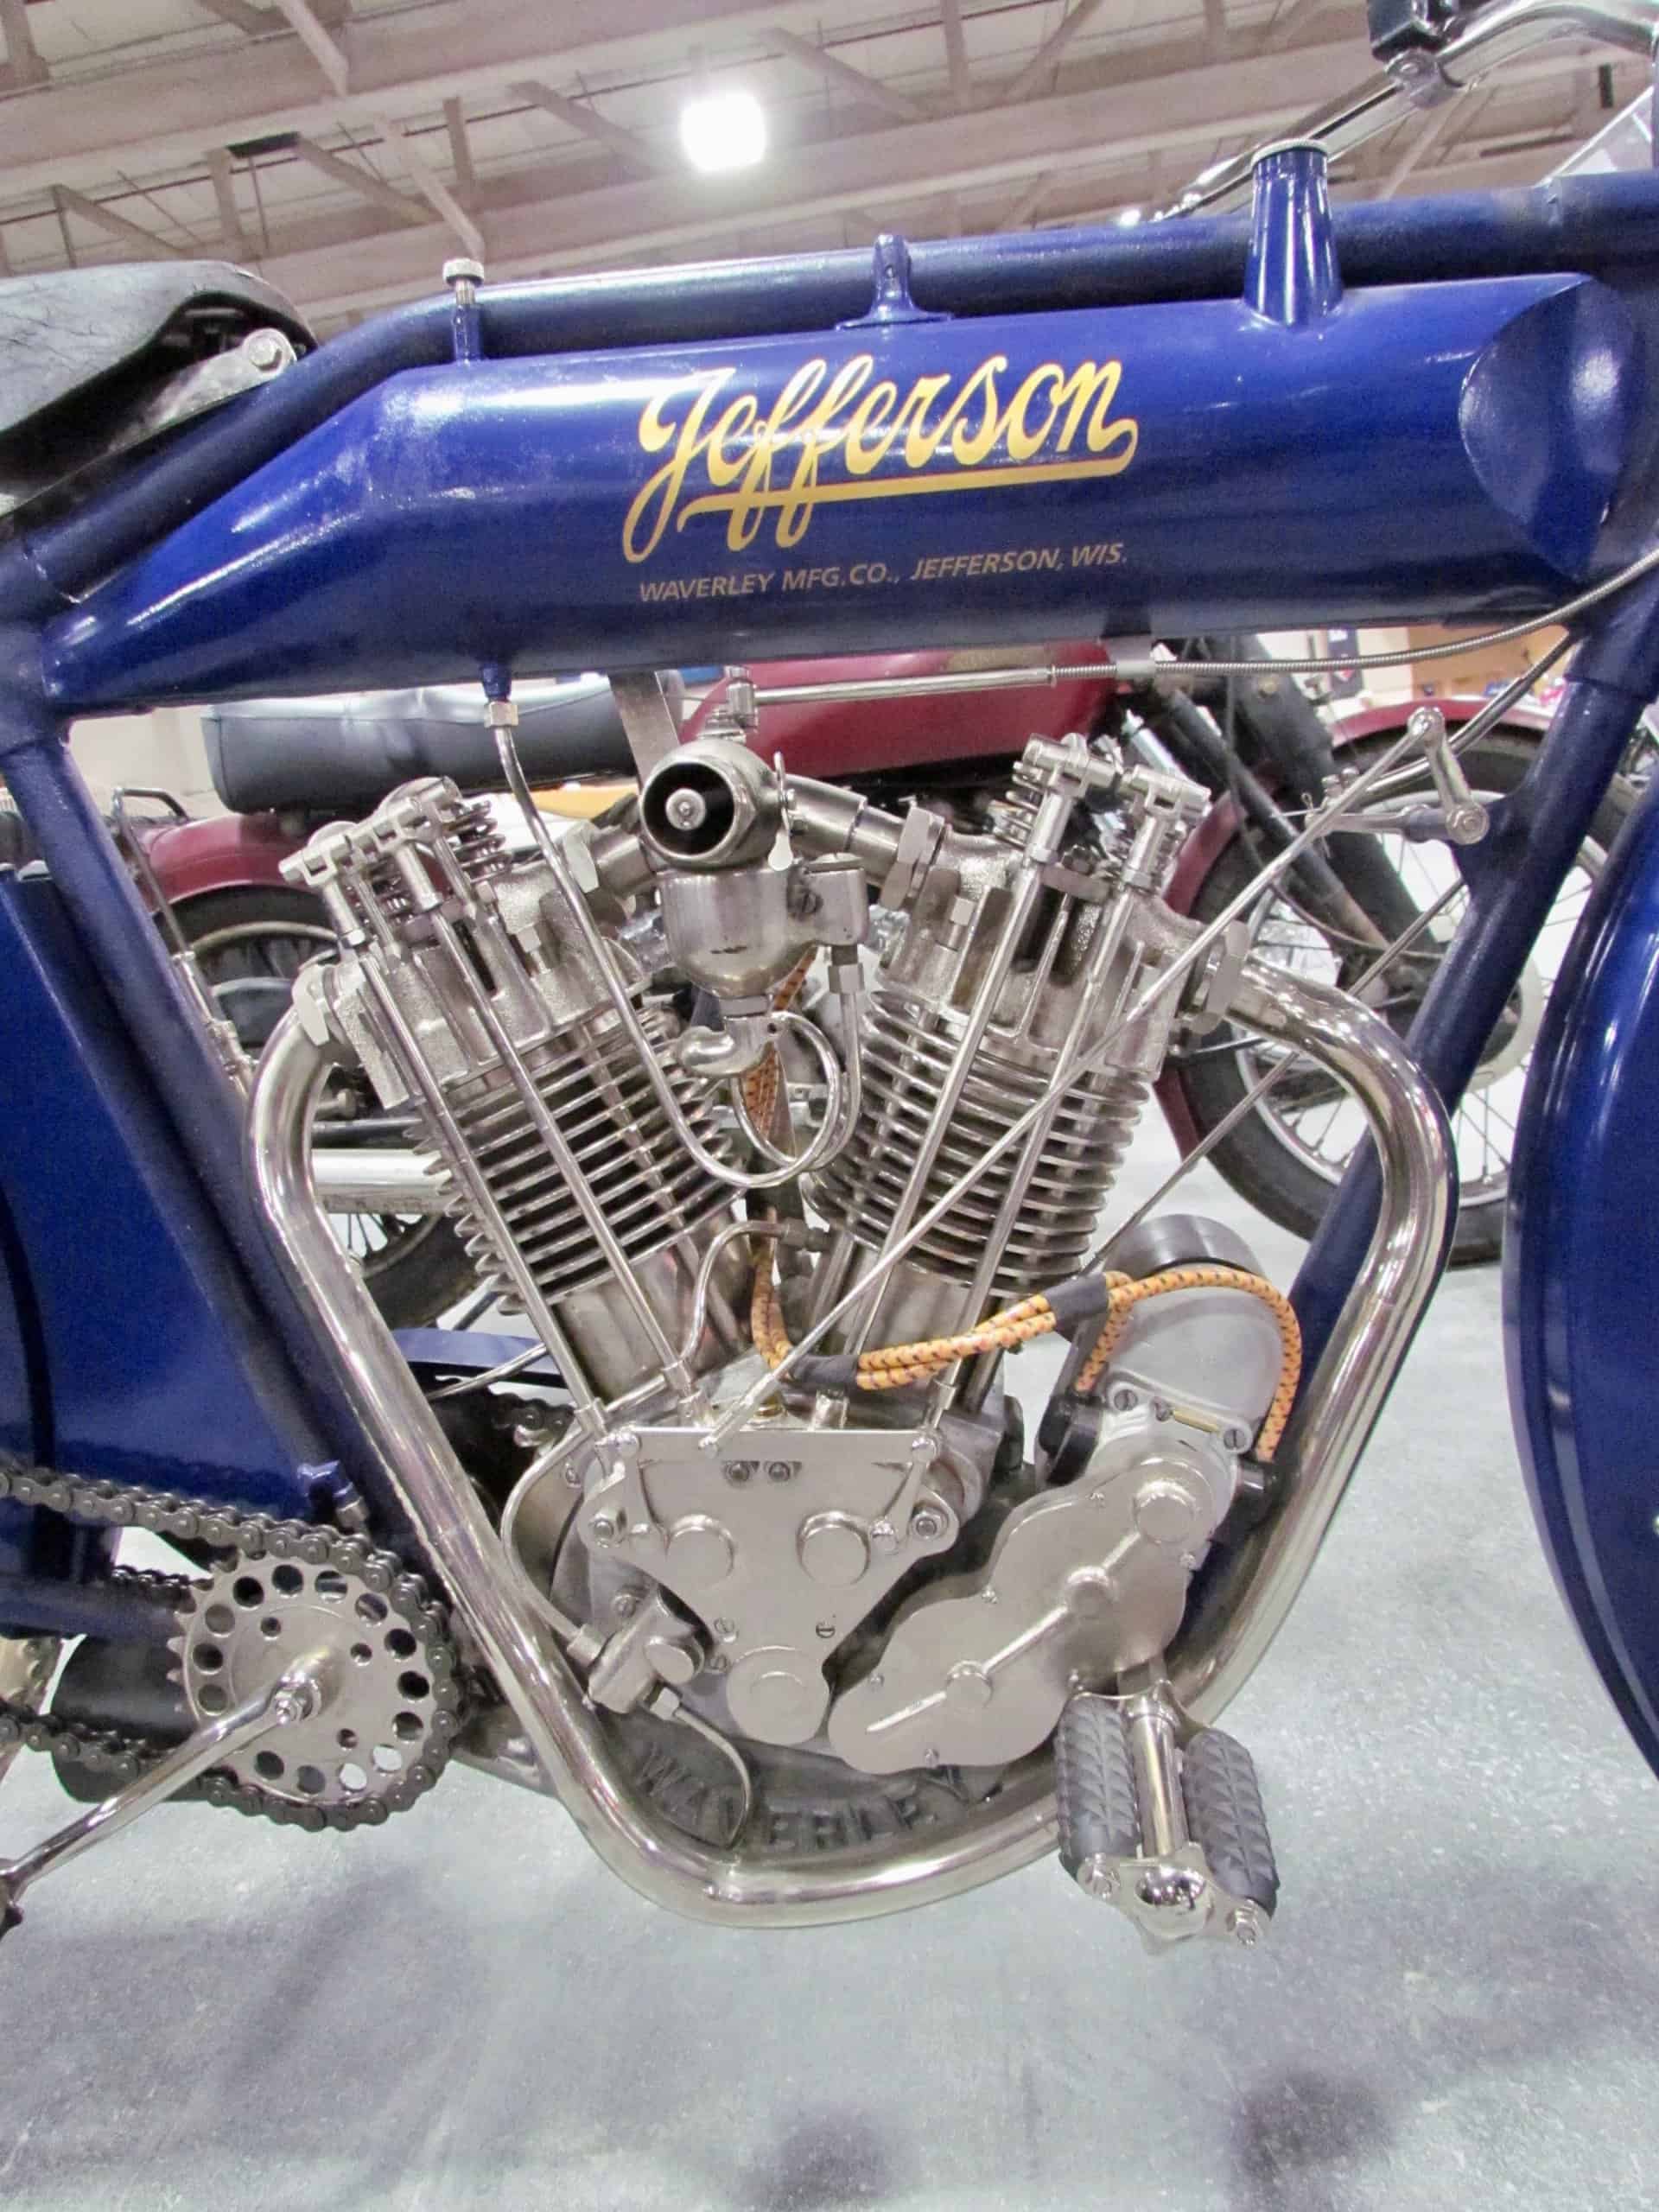 Vintage motorcycles, The gorgeous artistry of the vintage motorcycle, ClassicCars.com Journal